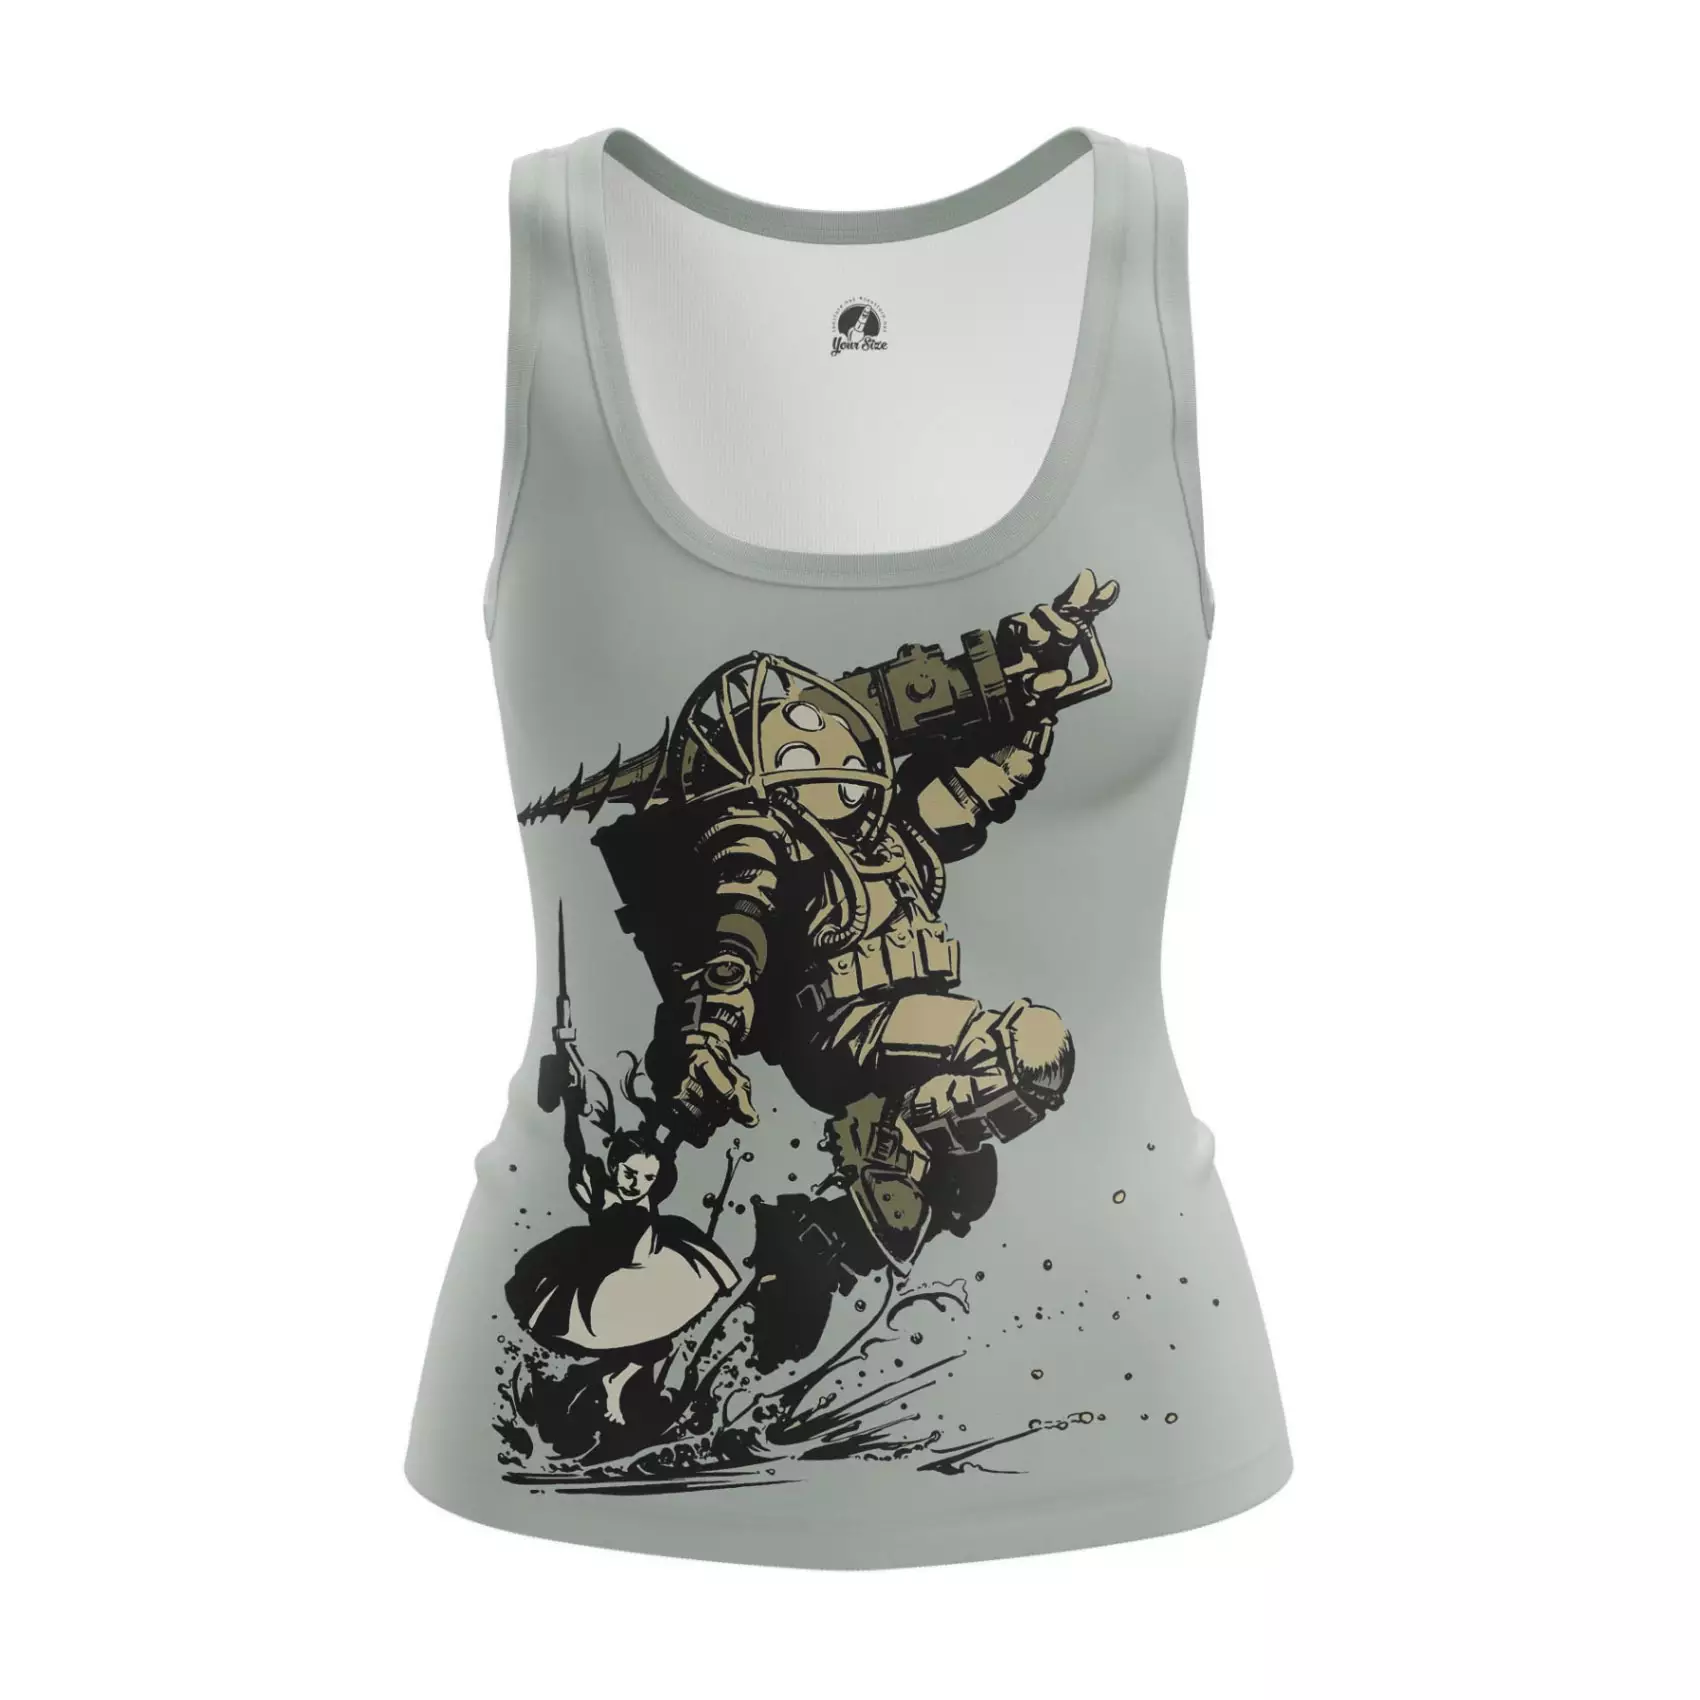 Women’s tank Bioshock Gaming Vest Idolstore - Merchandise and Collectibles Merchandise, Toys and Collectibles 2